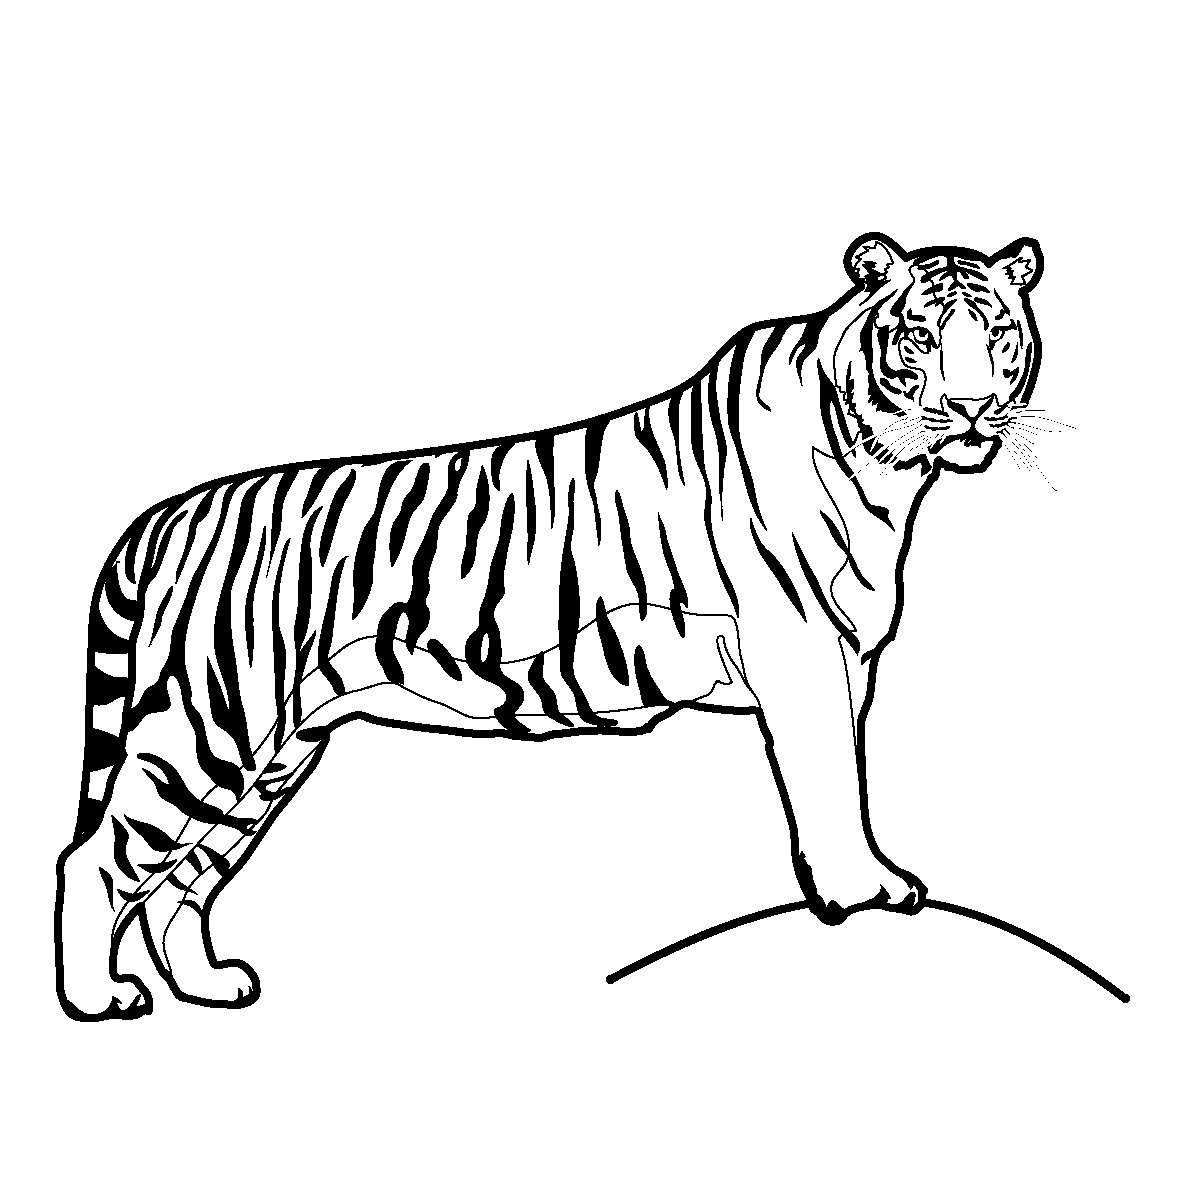  Tiger coloring pages | Animal coloring pages | #11